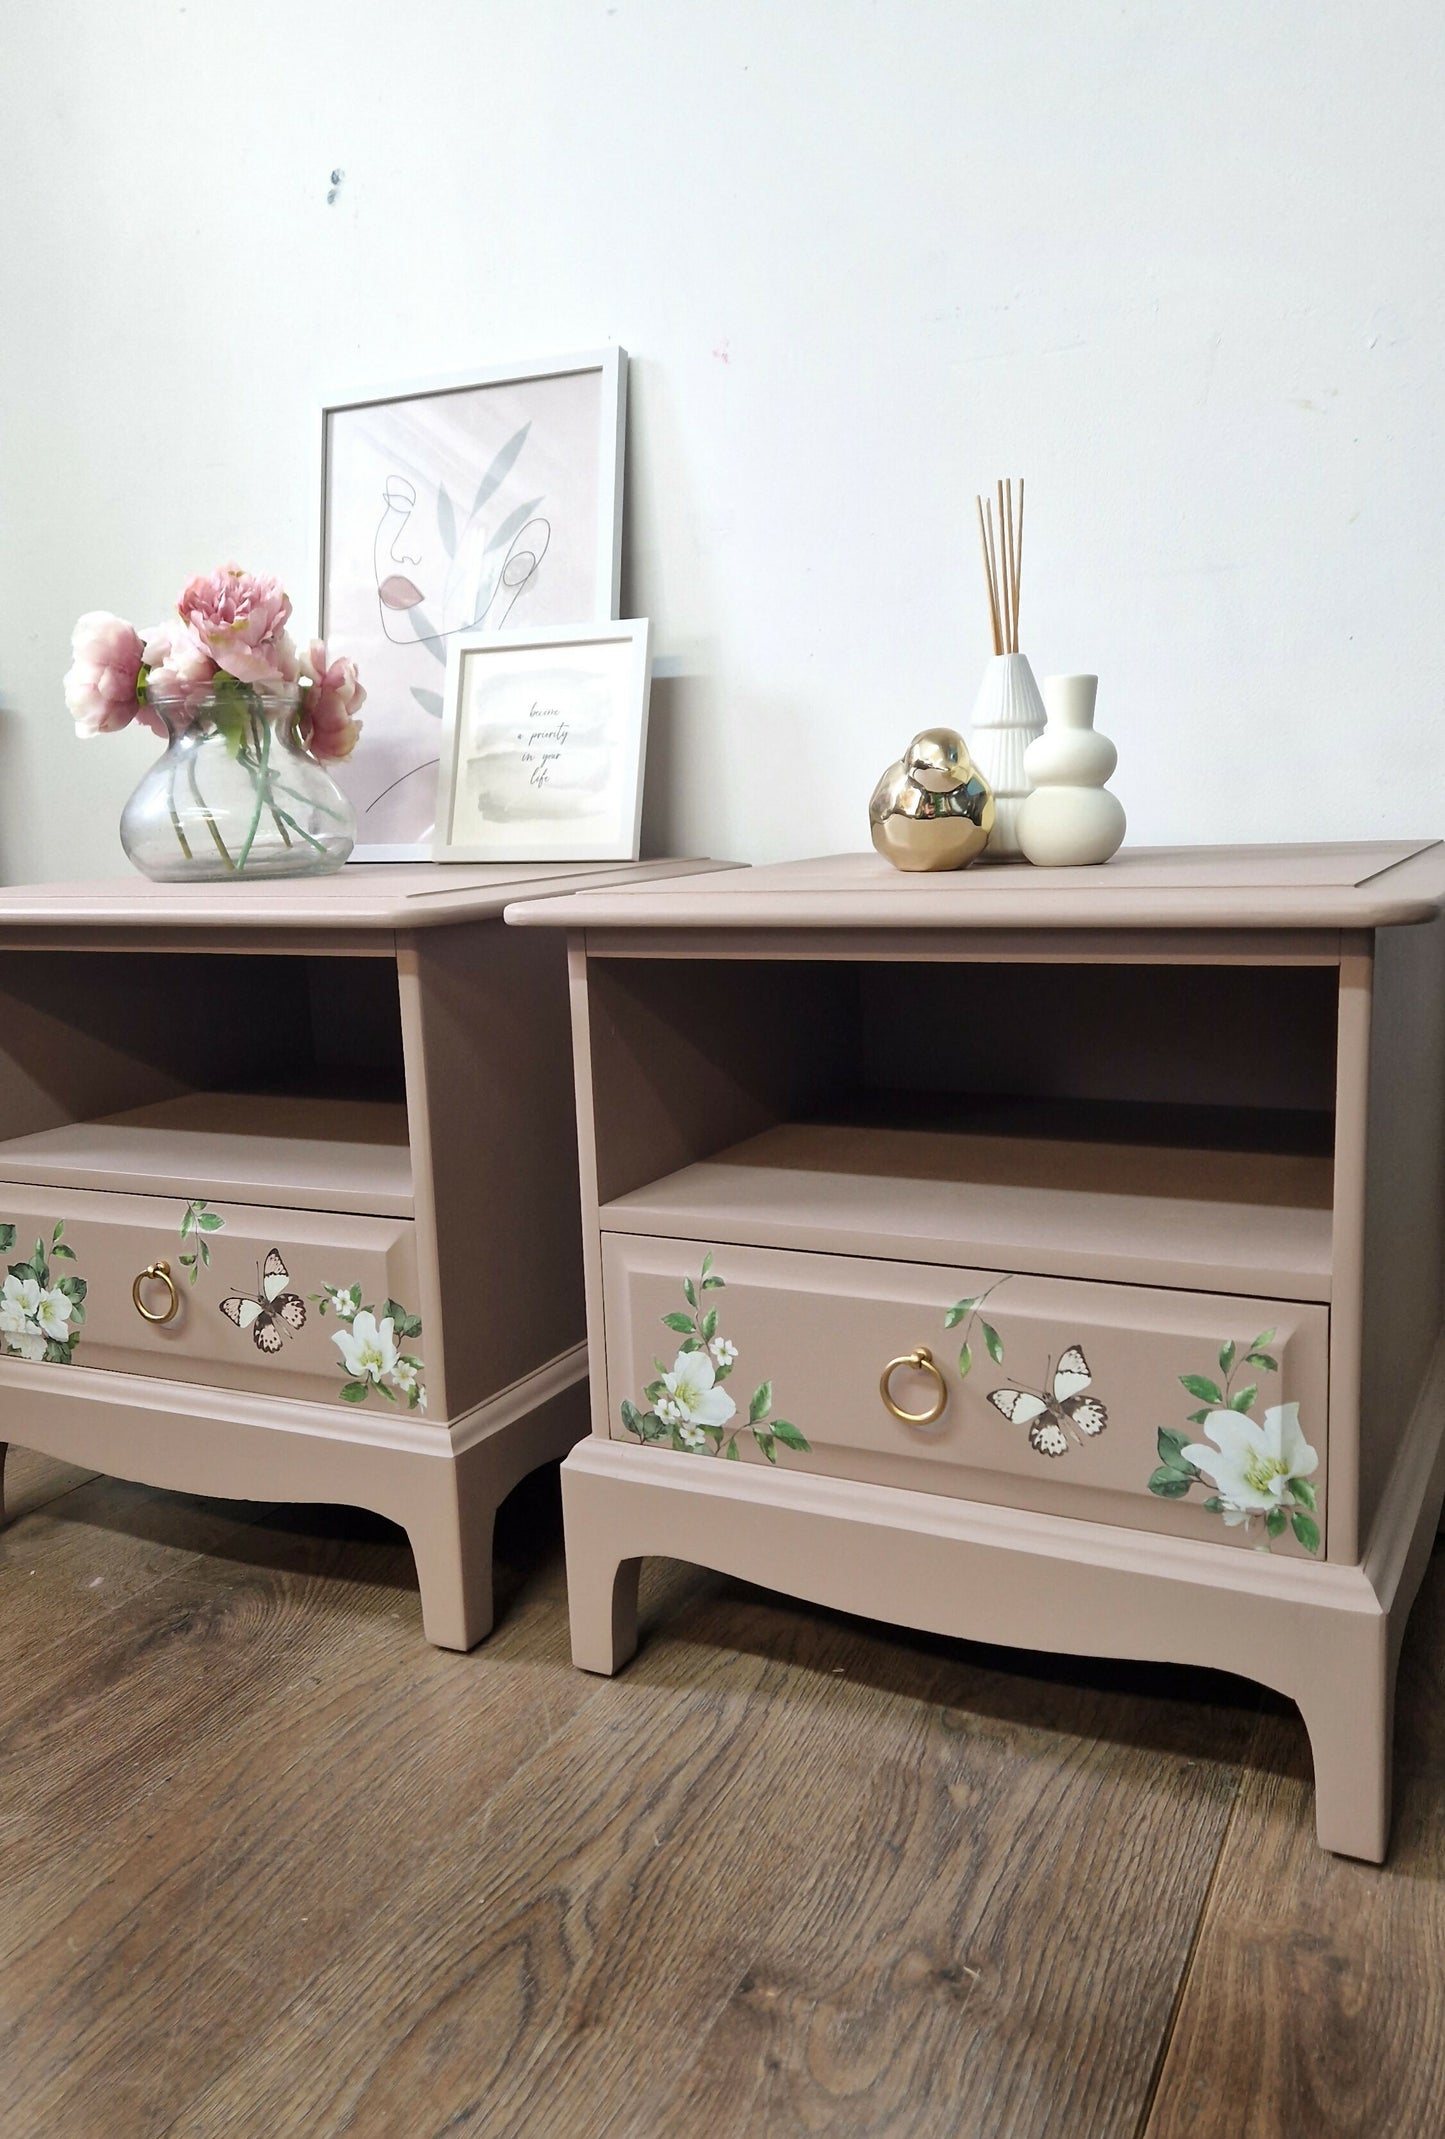 Stag pink trellis flowers bedside cabinets in pink